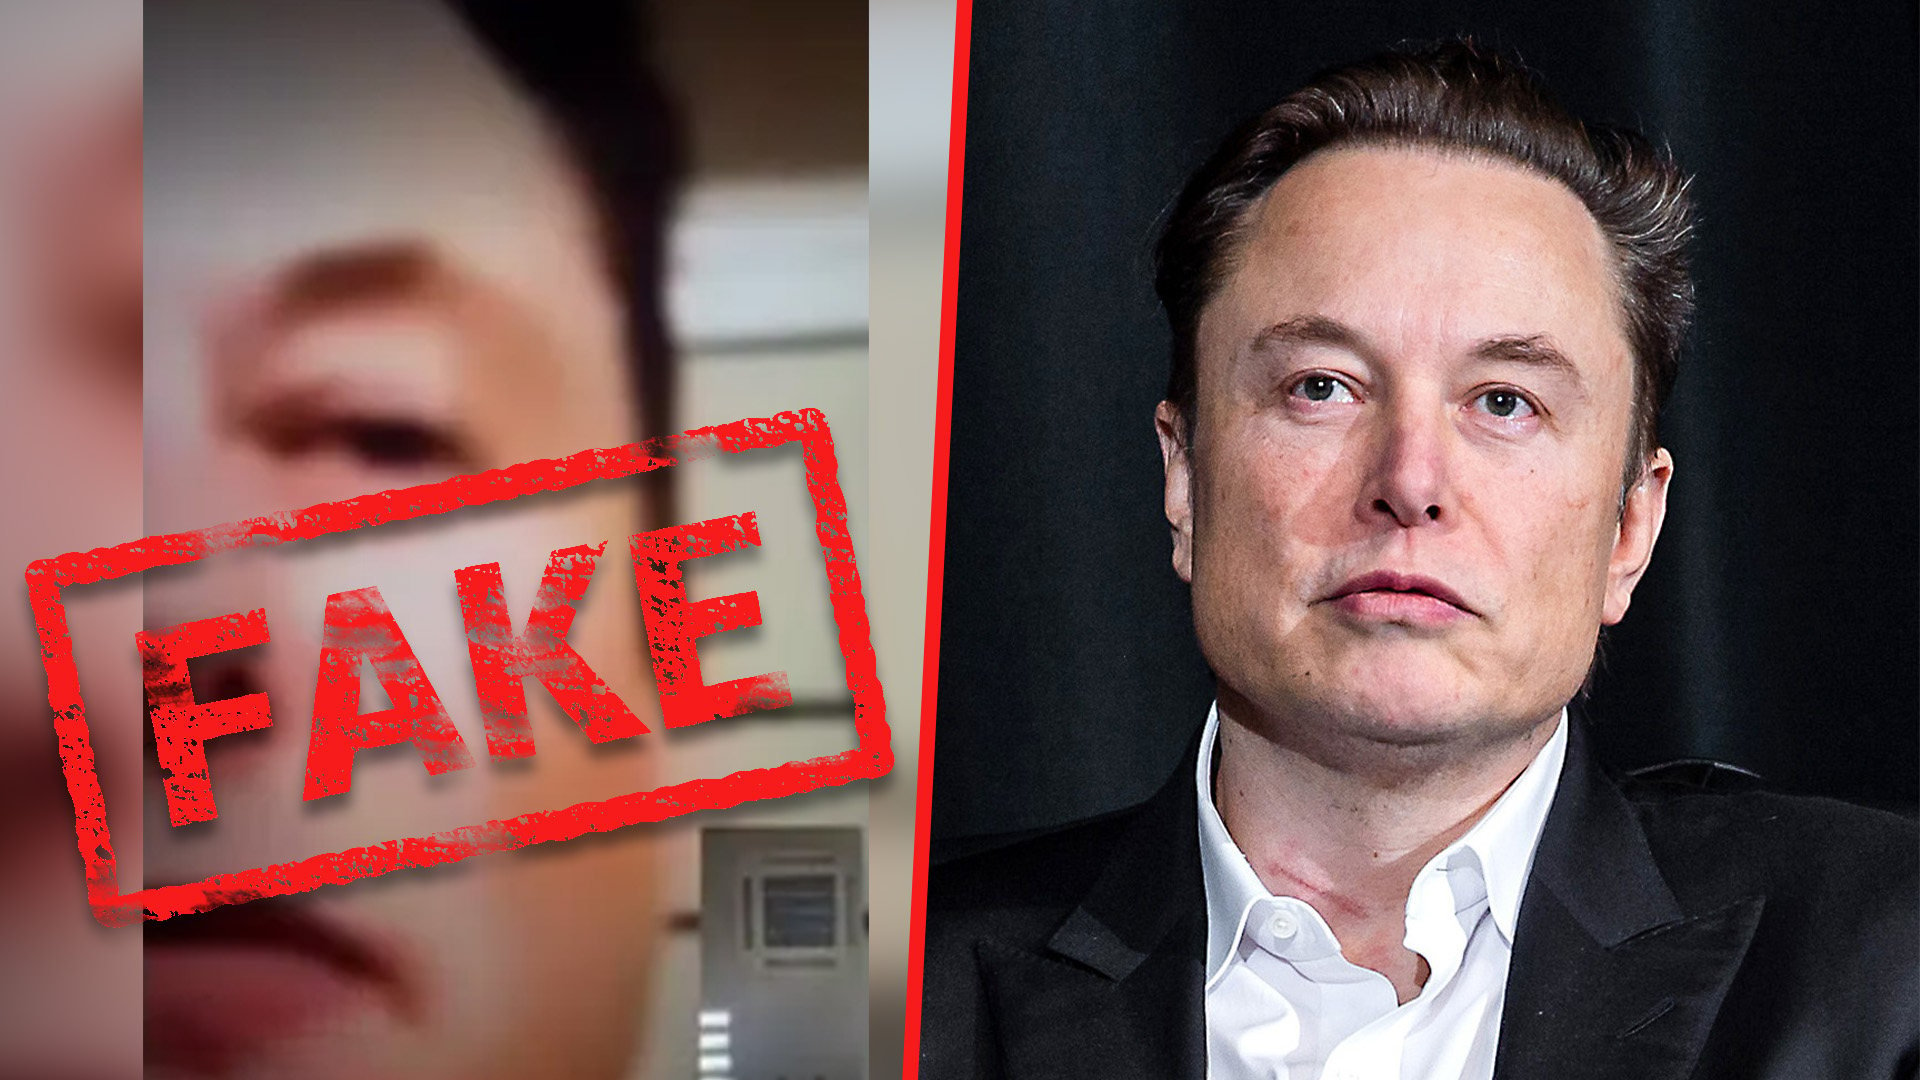 A woman in South Korea has been cheated out of US$50,000 by an online scammer impersonating the tech billionaire Elon Musk. Photo: SCMP composite/Shutterstock/QQ.com/Wikipedia